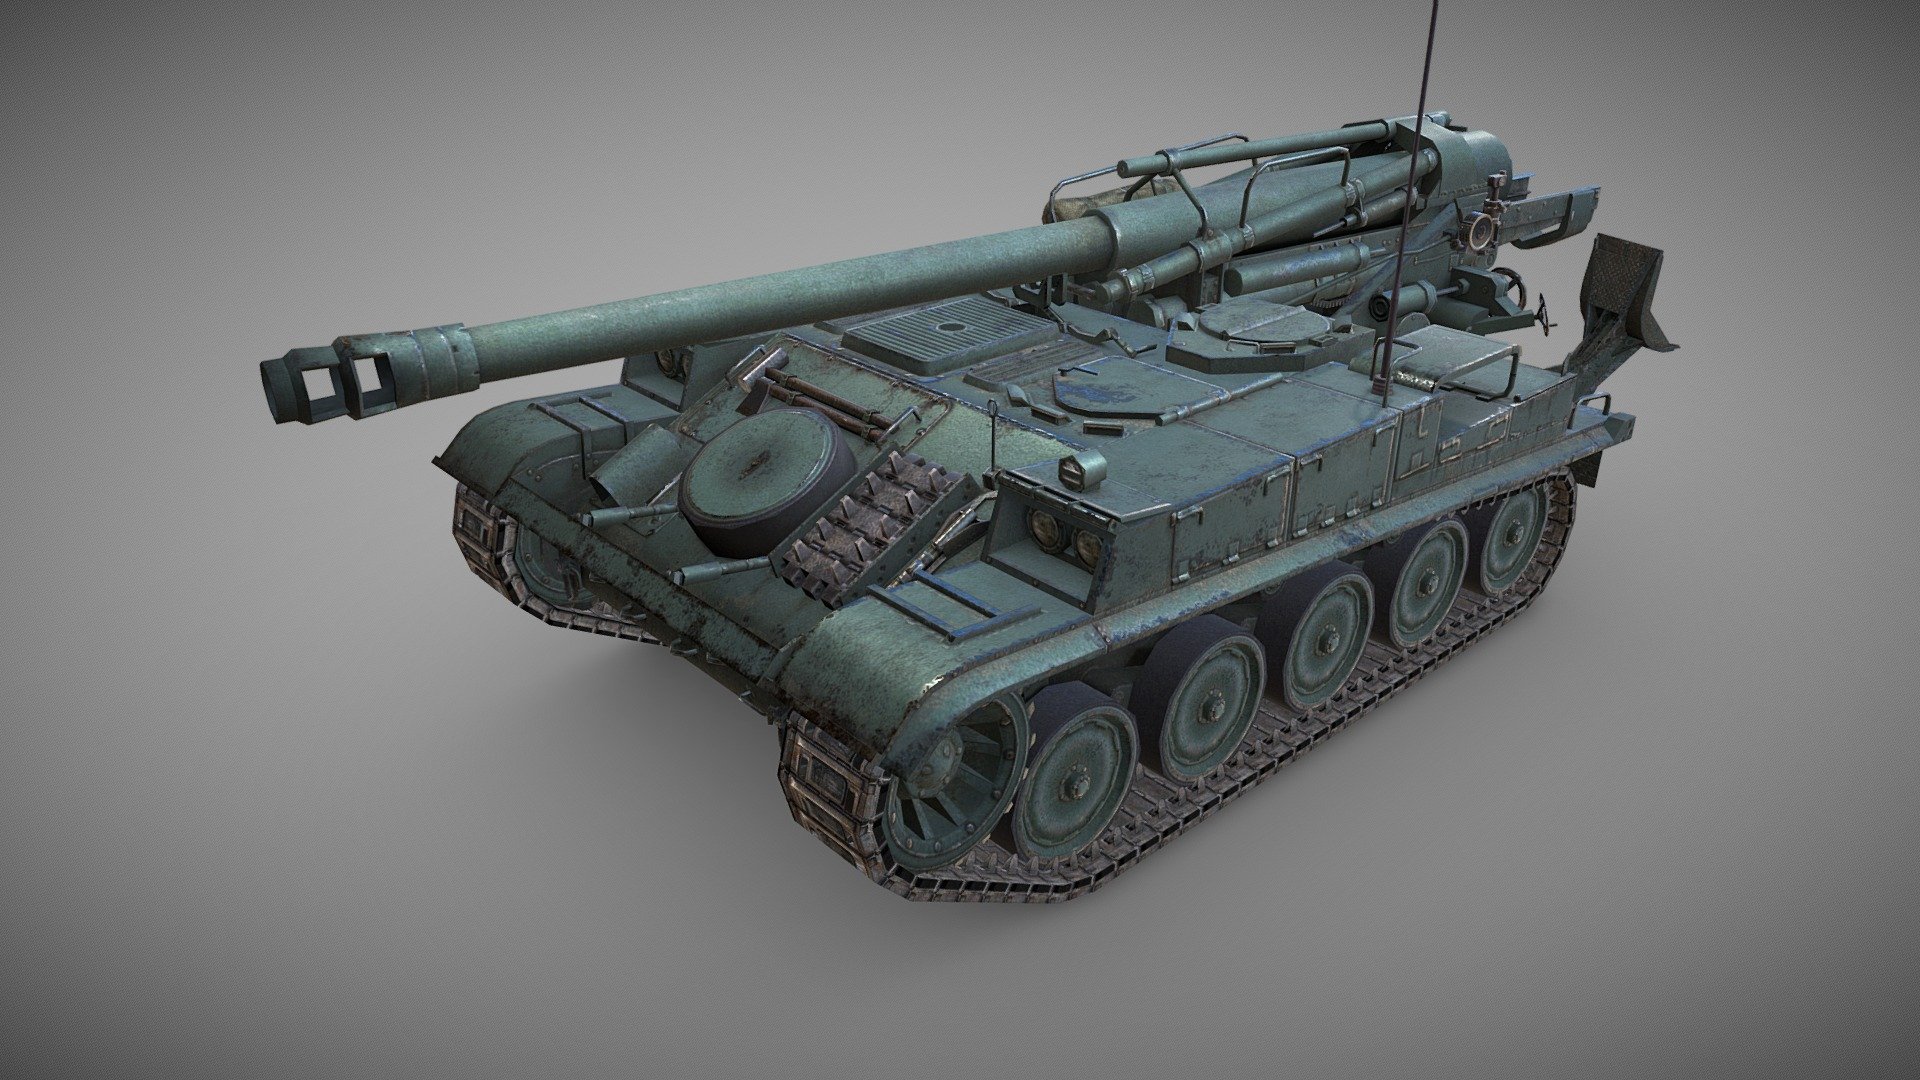 AMX 13F3AM - French 155mm self-propelled gun. This model was created for the &ldquo;World of Tanks